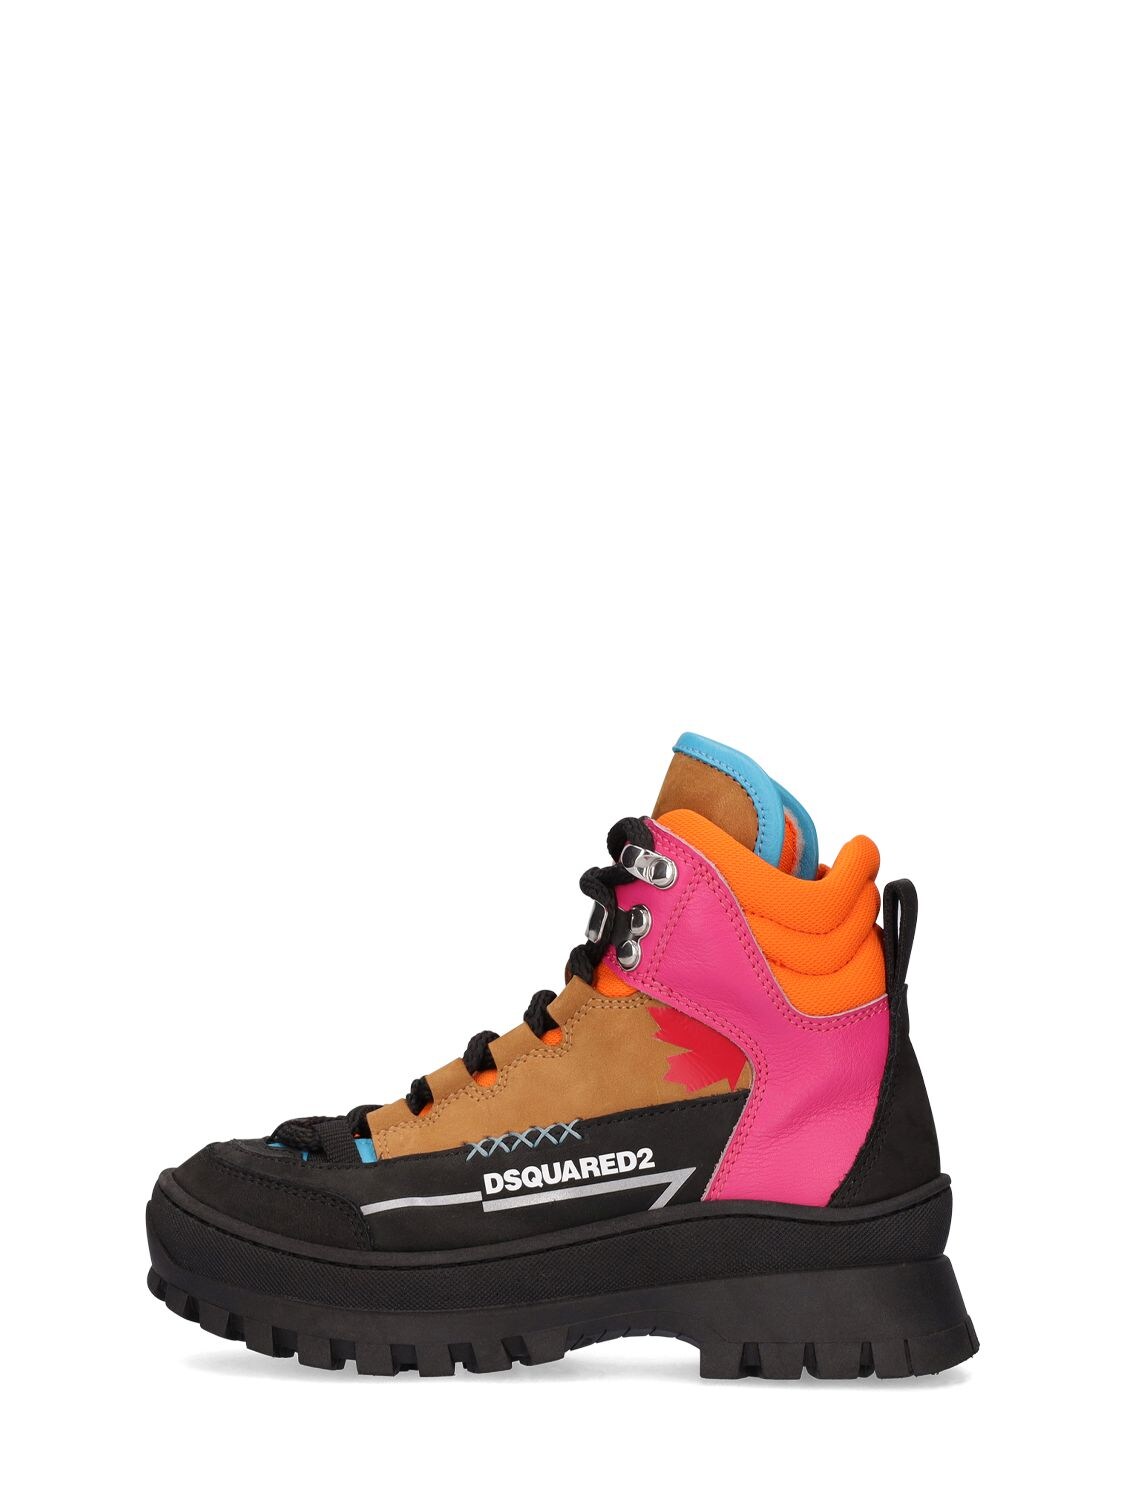 DSQUARED2 COLOR BLOCK LEATHER HIKING BOOTS W/ LOGO